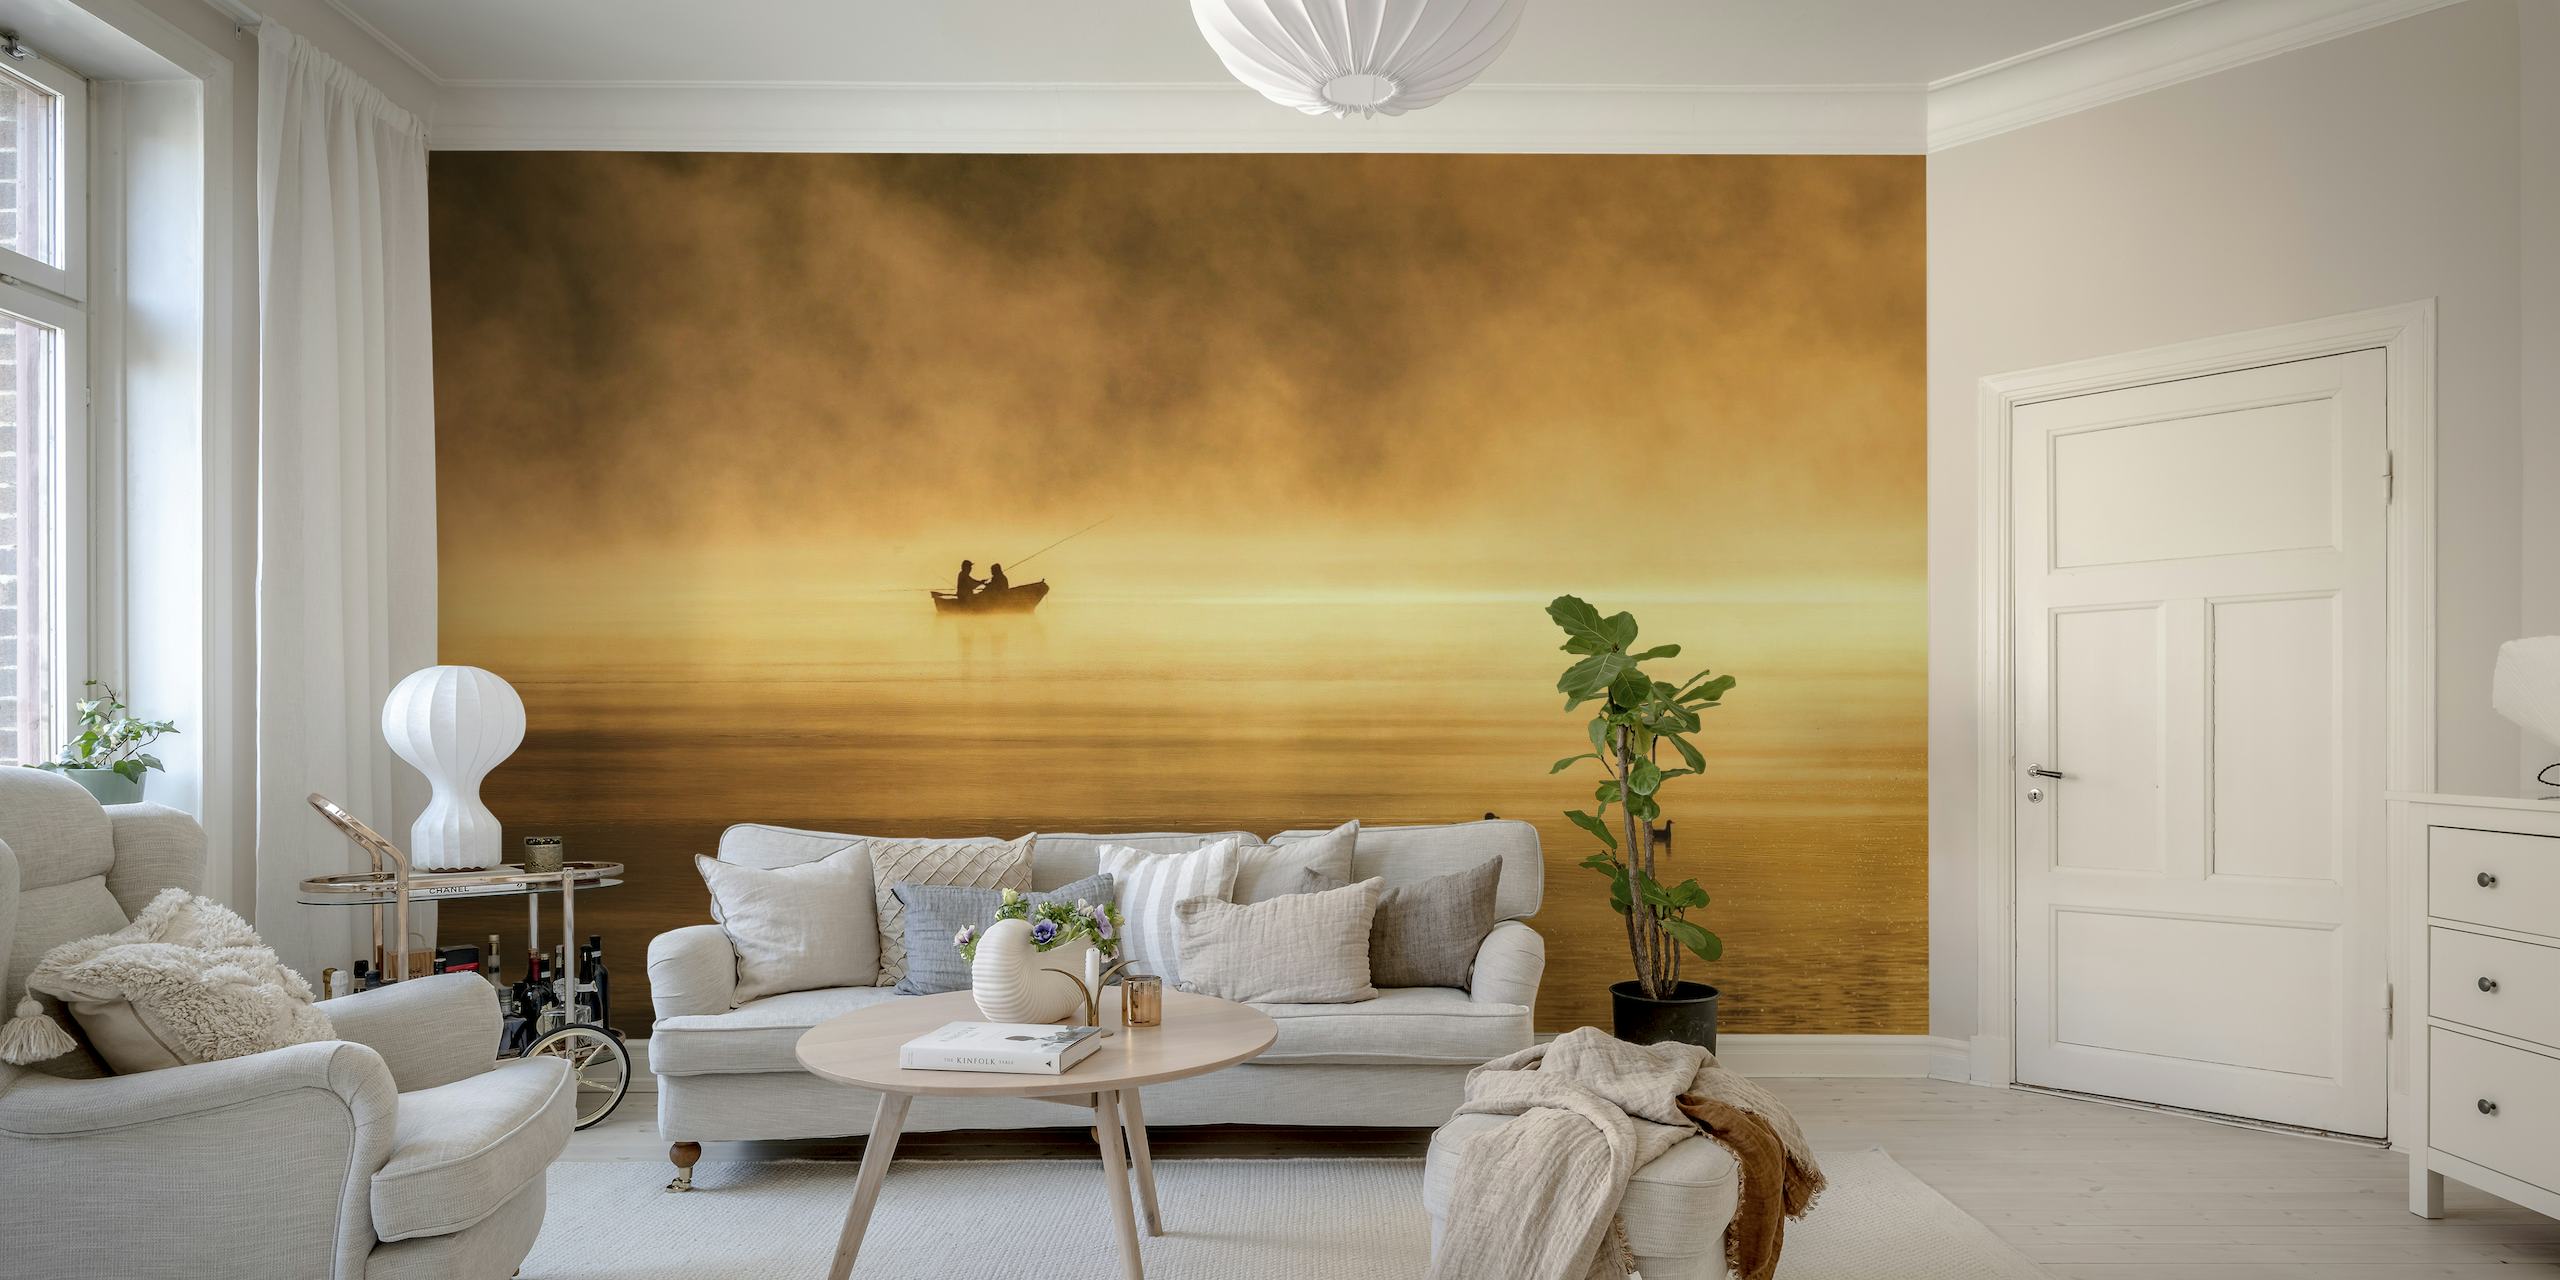 A tranquil scene of a fishing boat on a misty lake at sunrise in the 'Fishing for Glory' wall mural.